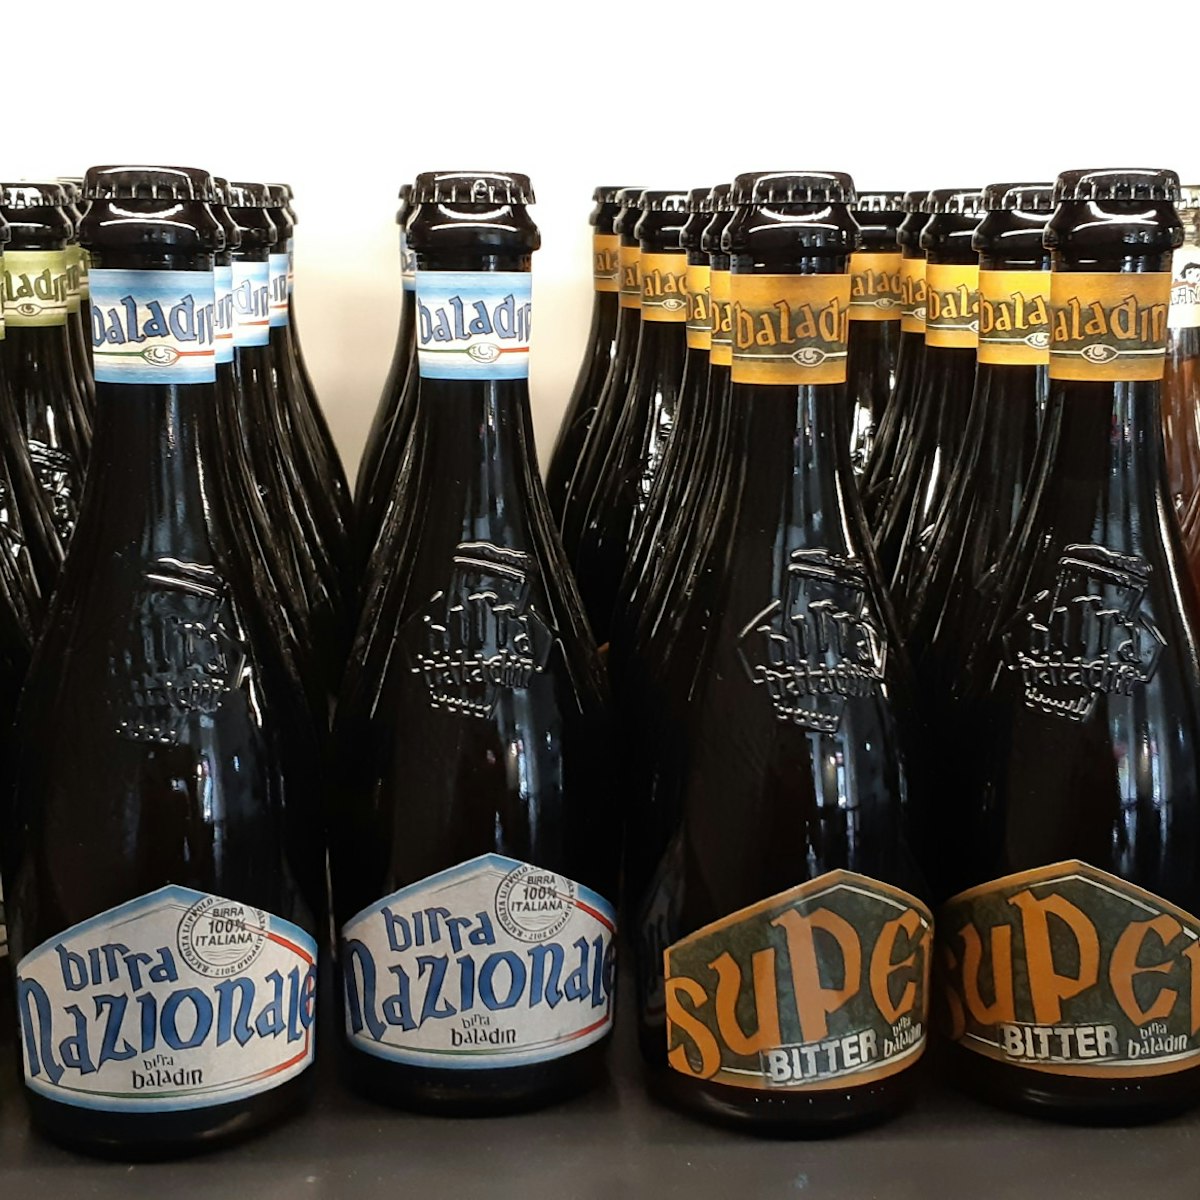 Artisanal beer from Open Baladin is sold in Trapizizno's adjacent store.